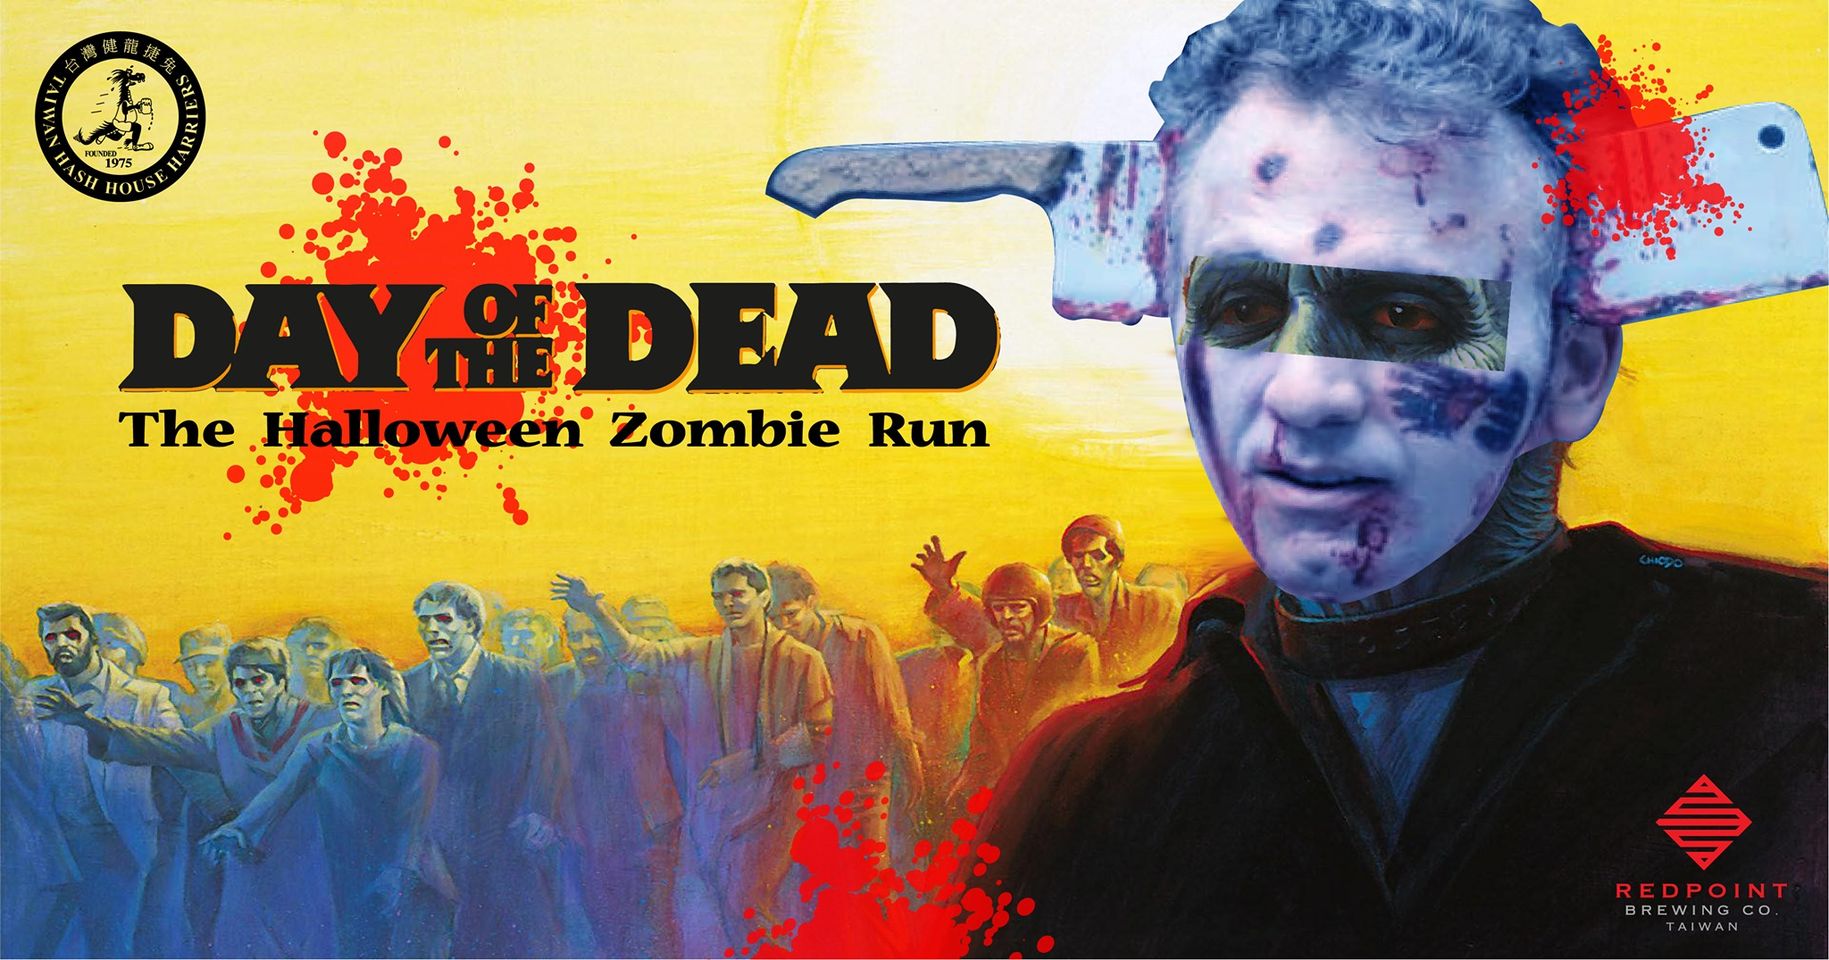 #2421 - Day of the Dead - The Halloween Zombie Run